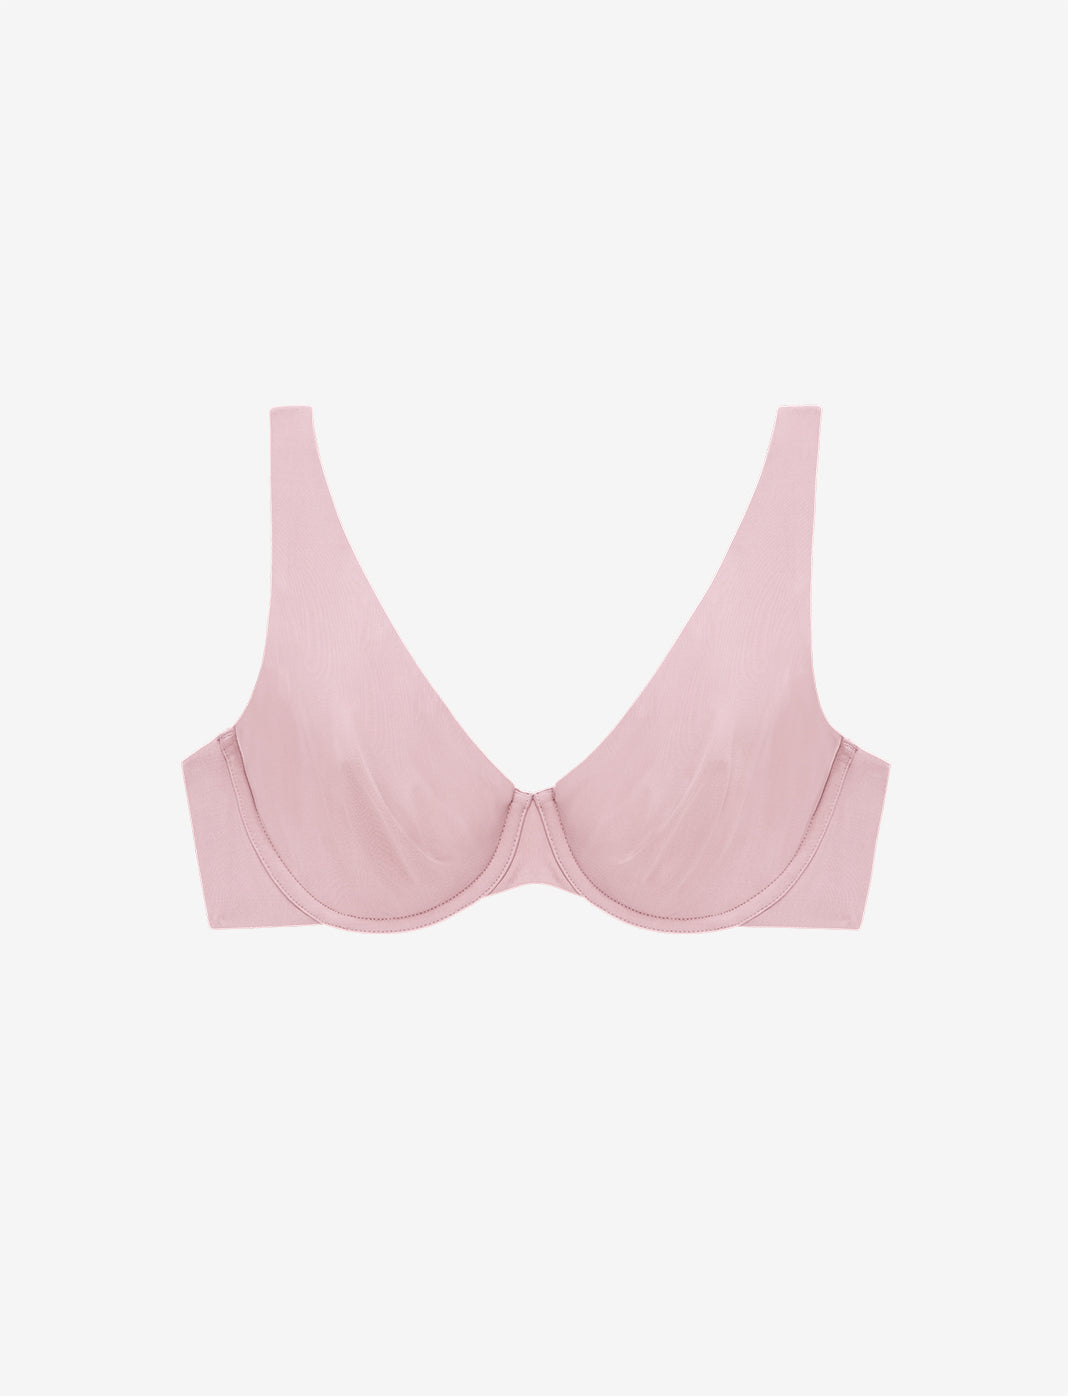 Womens Bras Online - Best Bra Types & Styles For Every Occasion